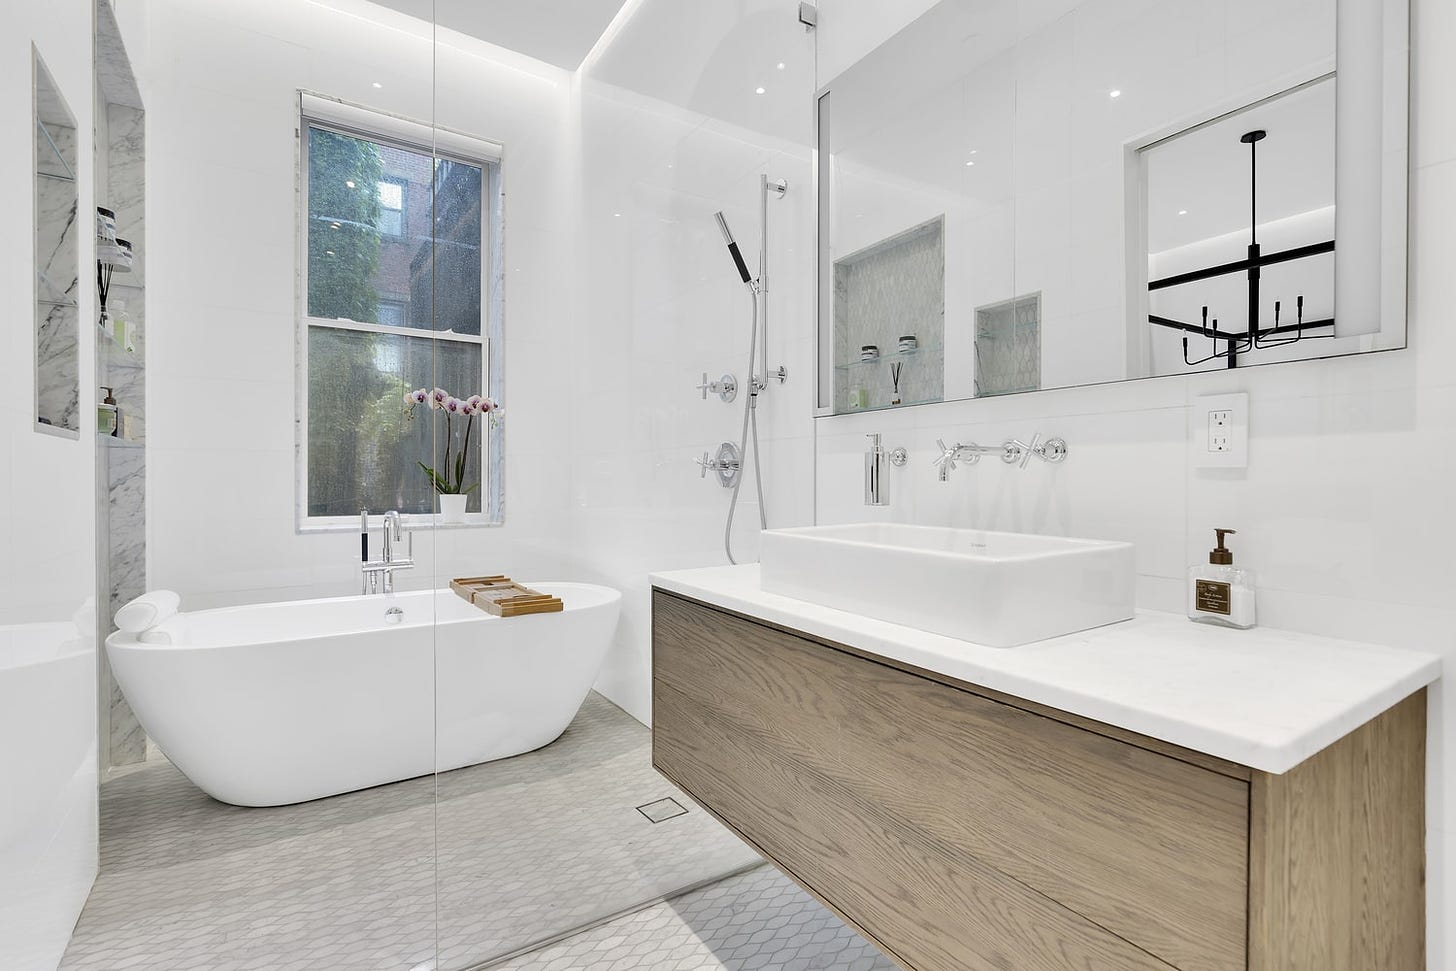 NYC Bathroom Remodel: 6 Life-Changing Ideas | Gallery KBNY